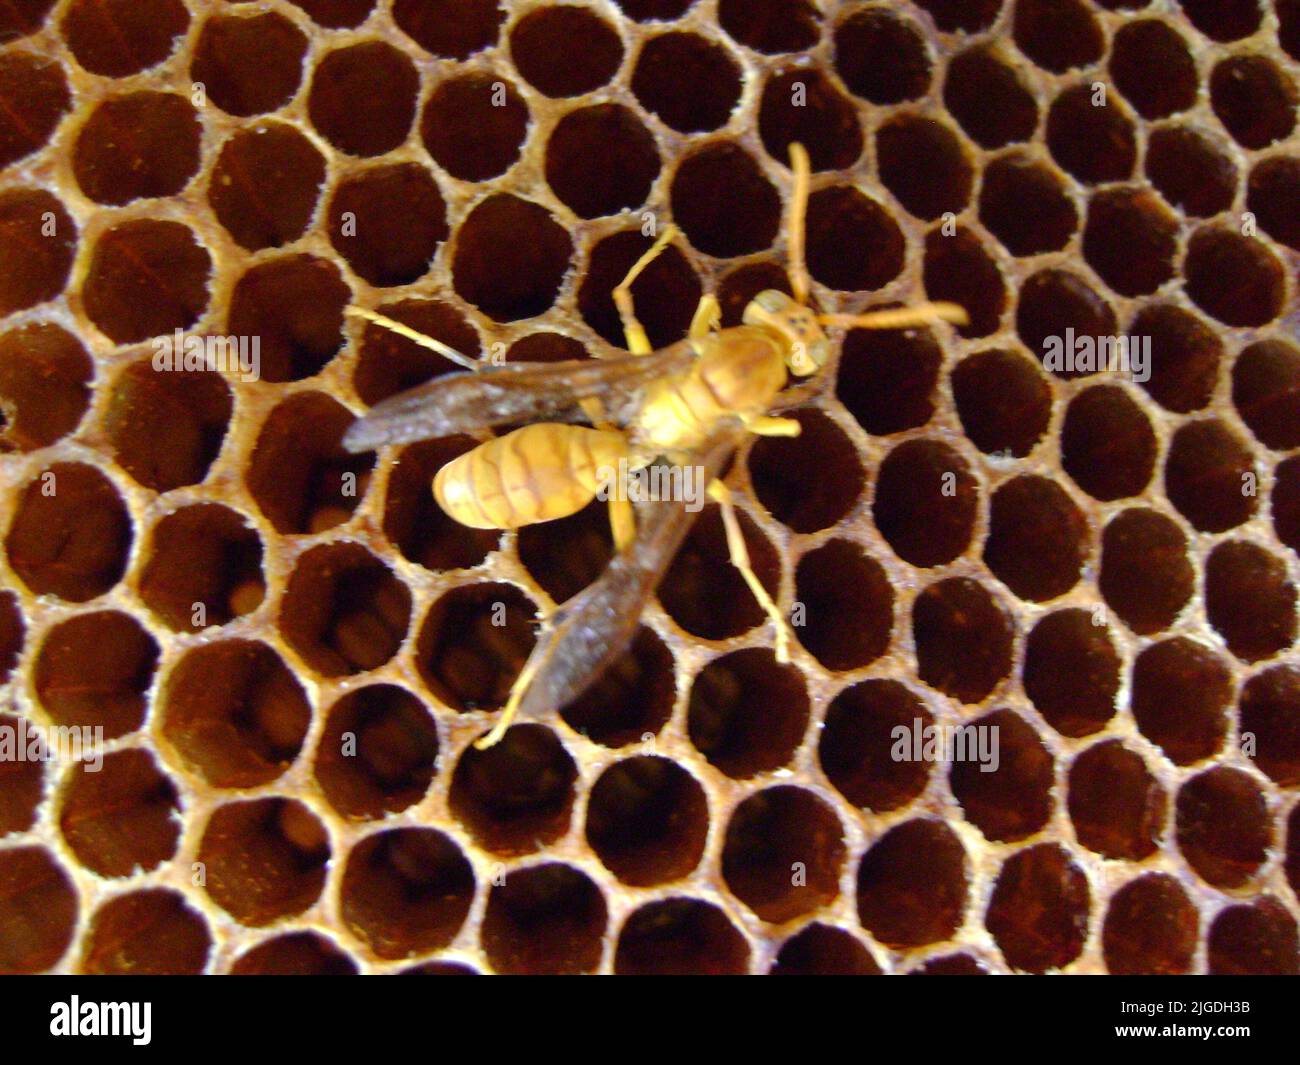 Indian Yellow Paper Wasp (Polistes olivaceus) nests have open combs with hexagonal cells for brood rearing : (pix SShukla) Stock Photo